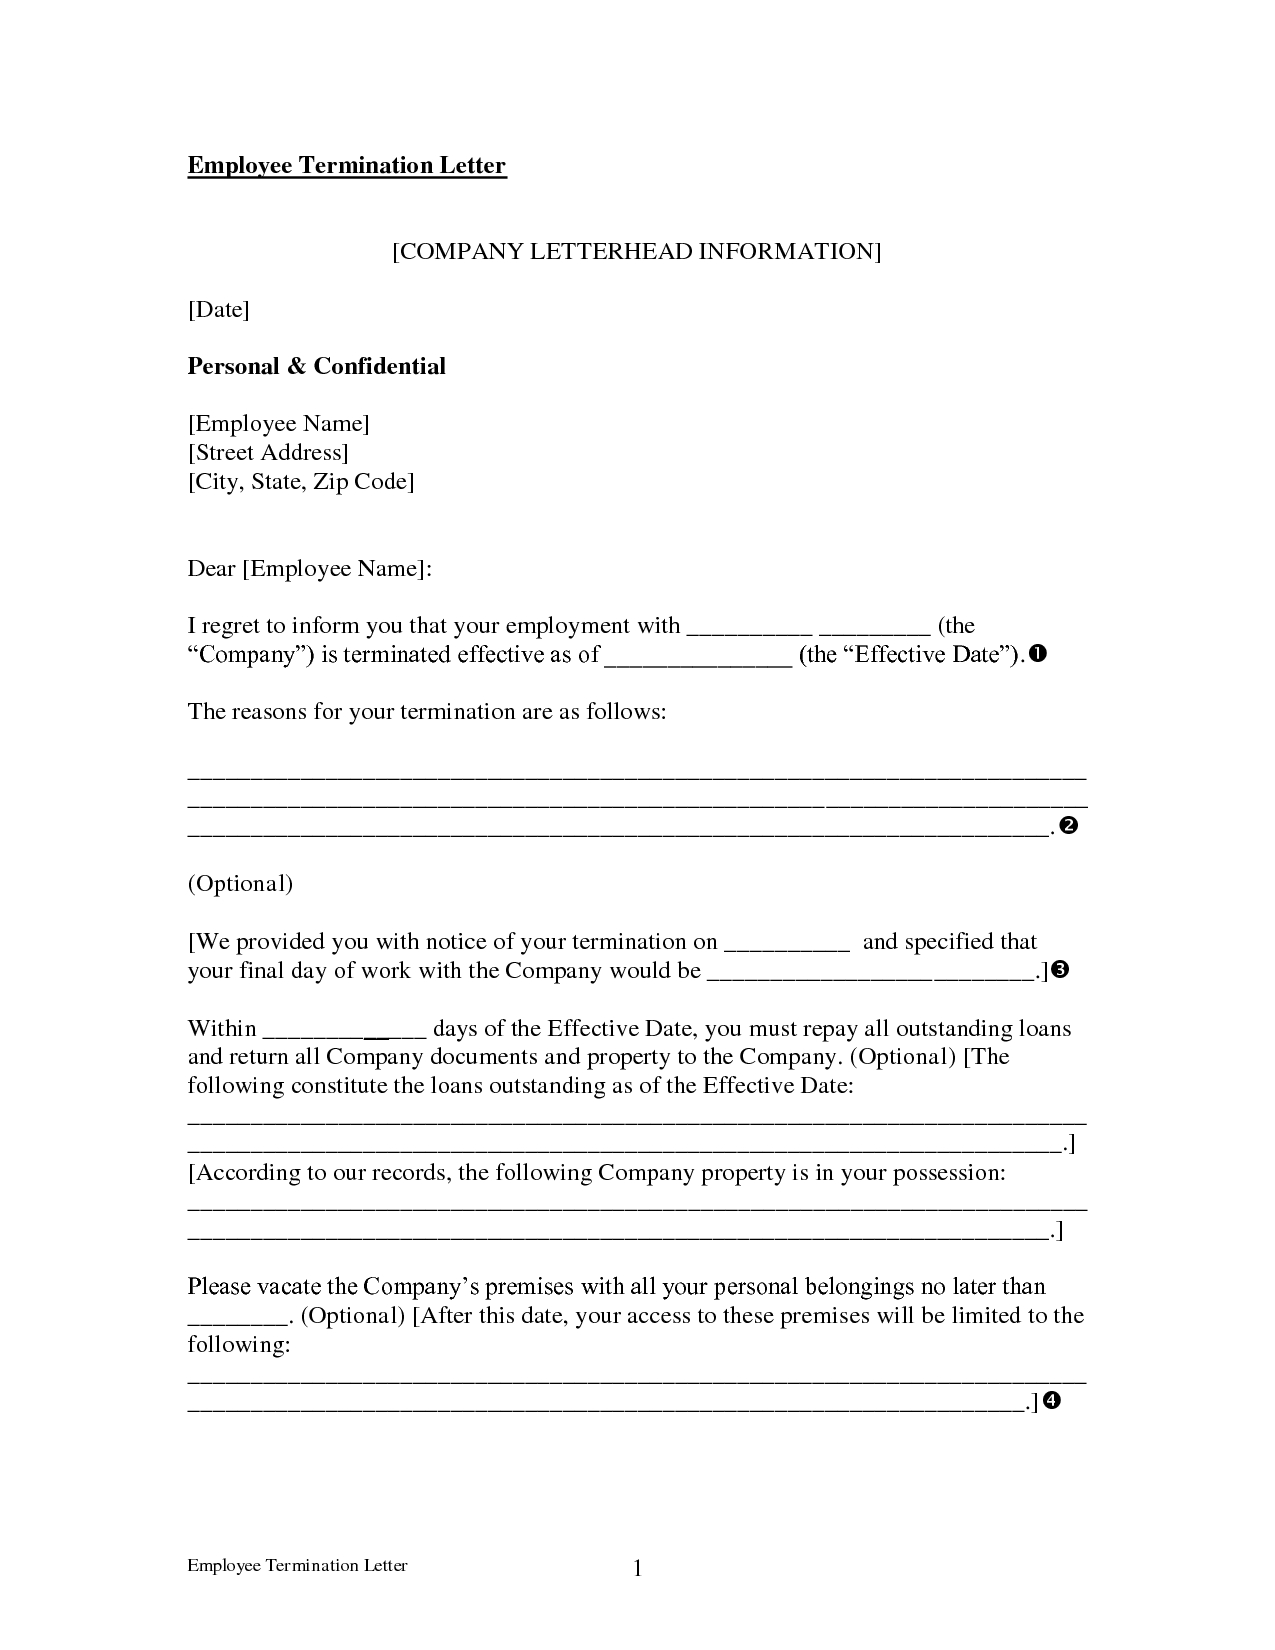 Lease Termination Letter Template - Example Termination Letter to Employee Samples